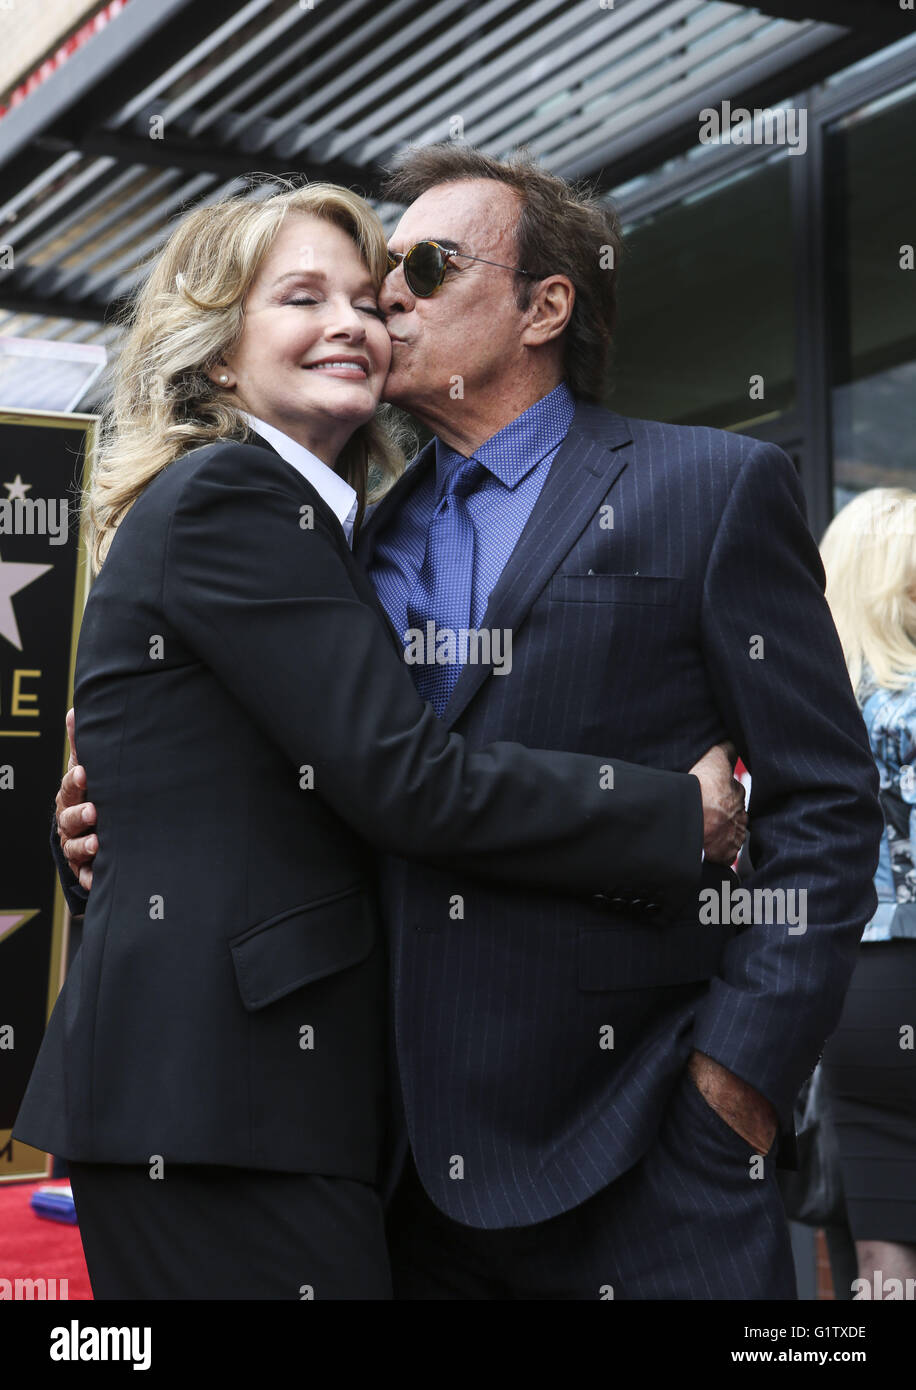 Los Angeles, California, USA. 19th May, 2016. 'Days of Our Lives' Actress DEIDRE HALL (L) attends a ceremony as she is being honored with a star on The Hollywood Walk Of Fame. Credit:  Ringo Chiu/ZUMA Wire/Alamy Live News Stock Photo